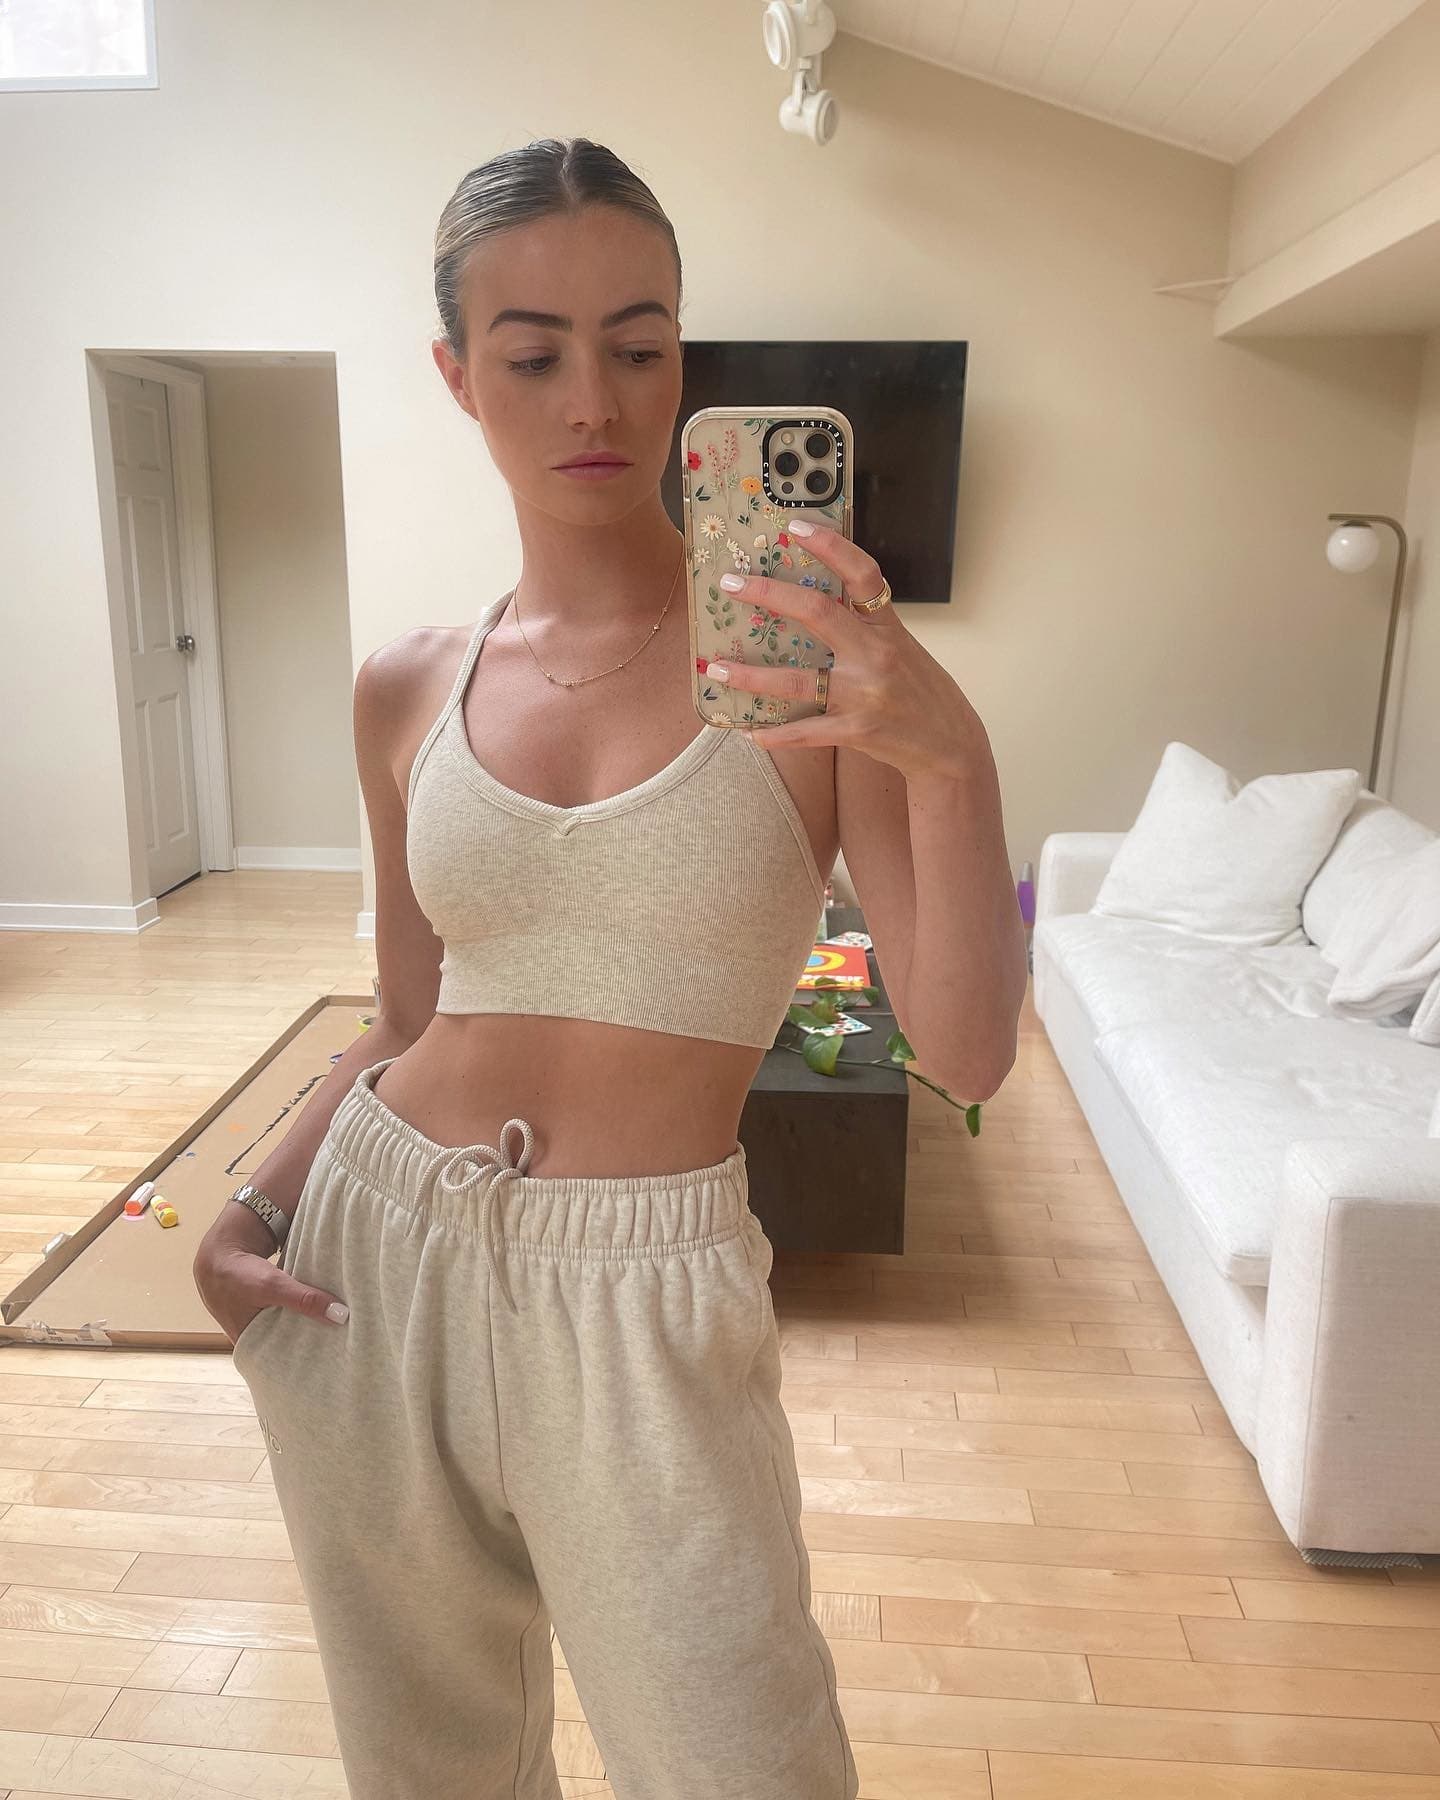 @ewebbz wearing a comfy lounge sports bra in an oatmeal color with a pair of matching sweatpants while taking a mirror selfie in her living room.  